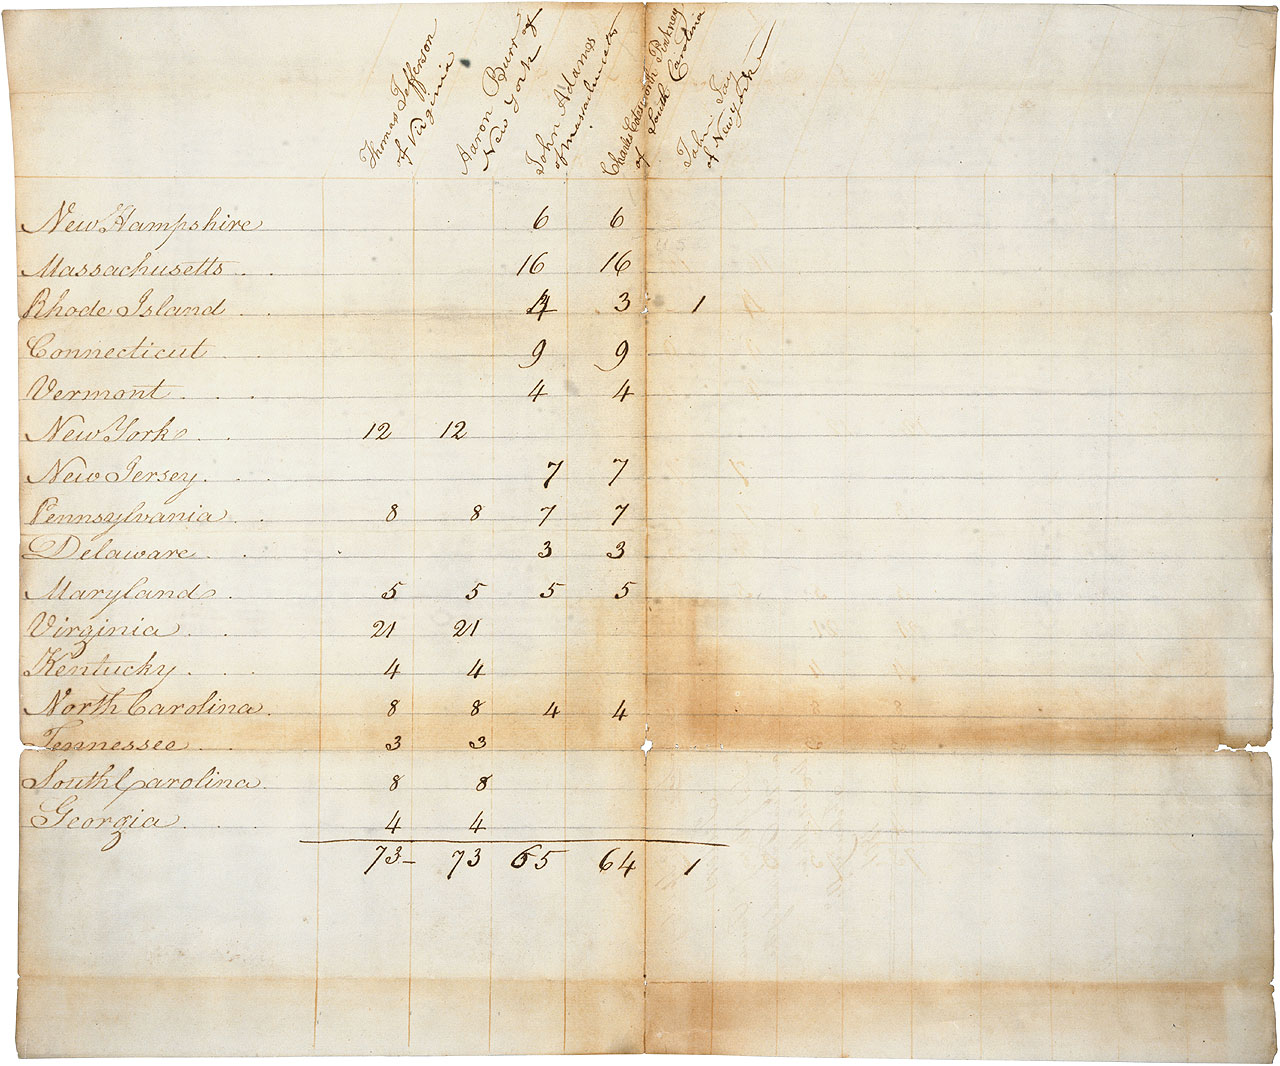 Tally of Electoral Votes for the 1800 Presidential Election, February 11, 1801 (National Archives)